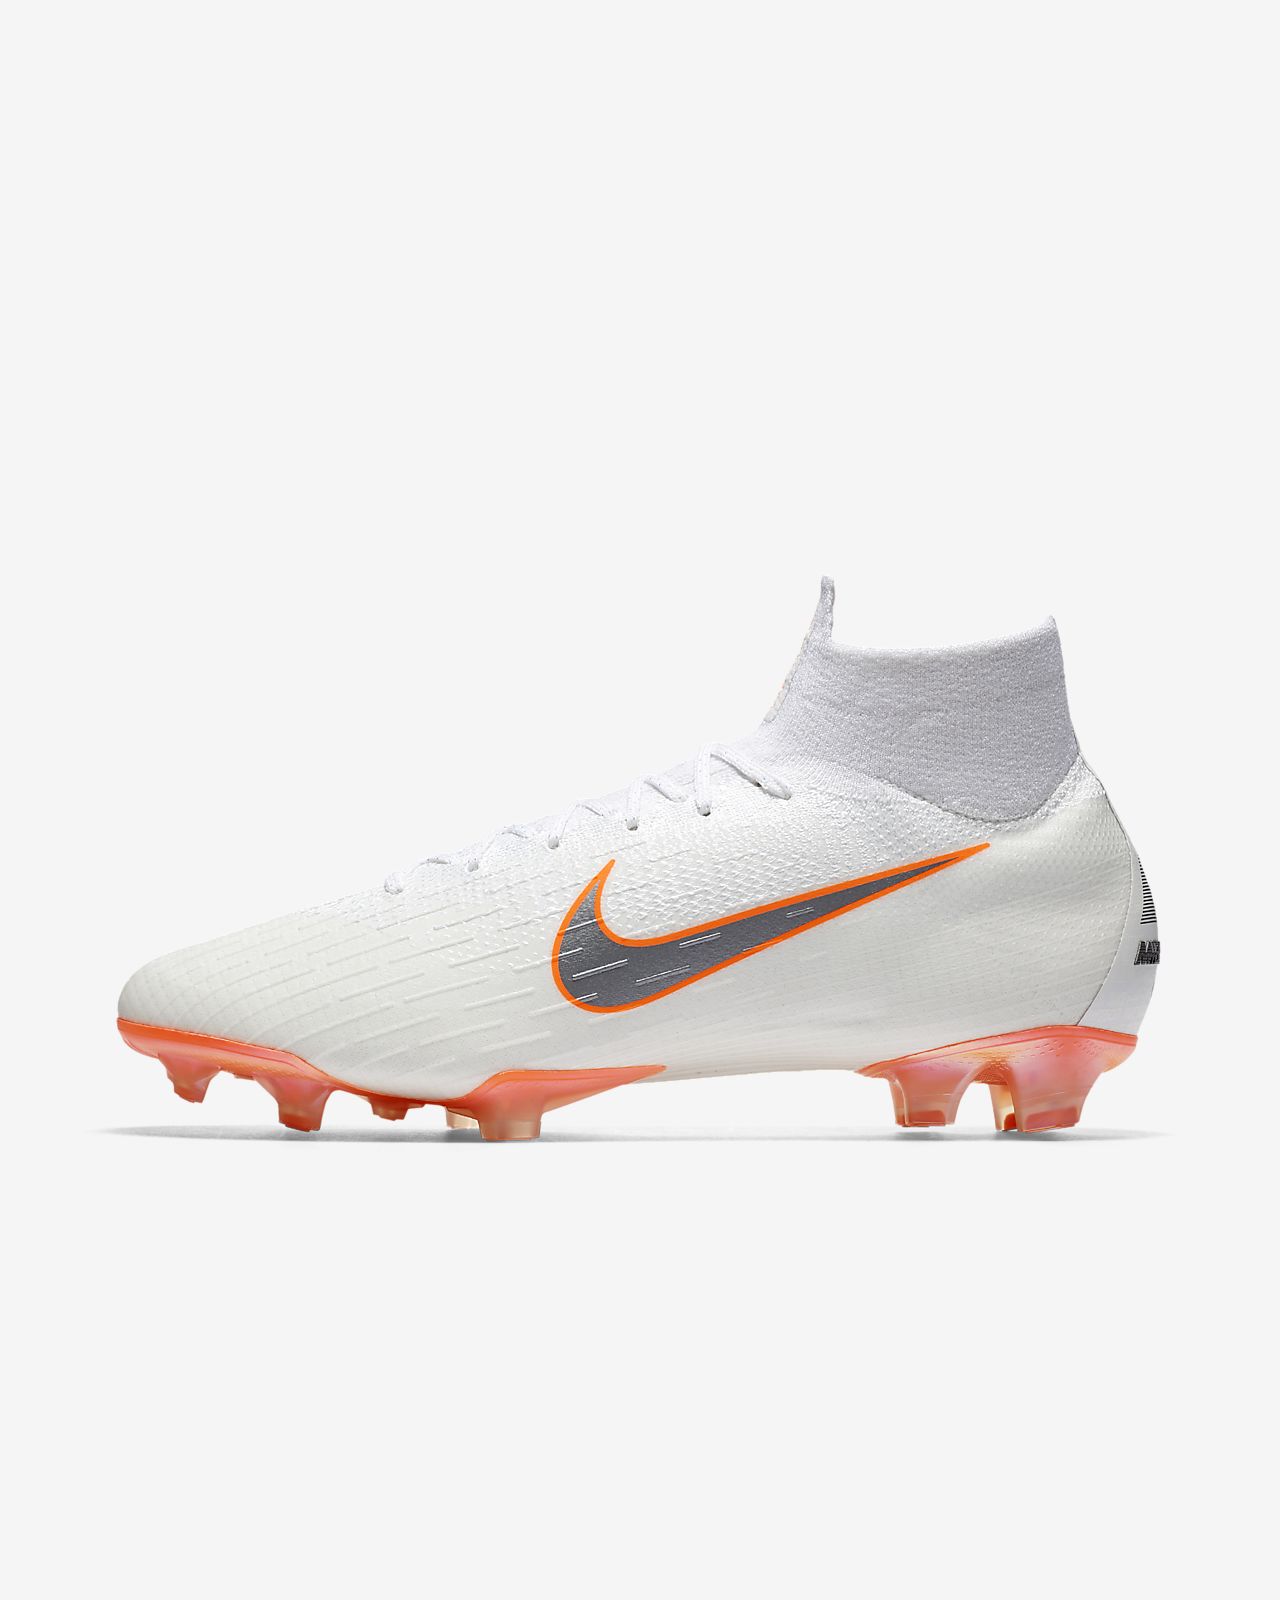 Nike Magista II Football Boot Collection. Lovell Soccer